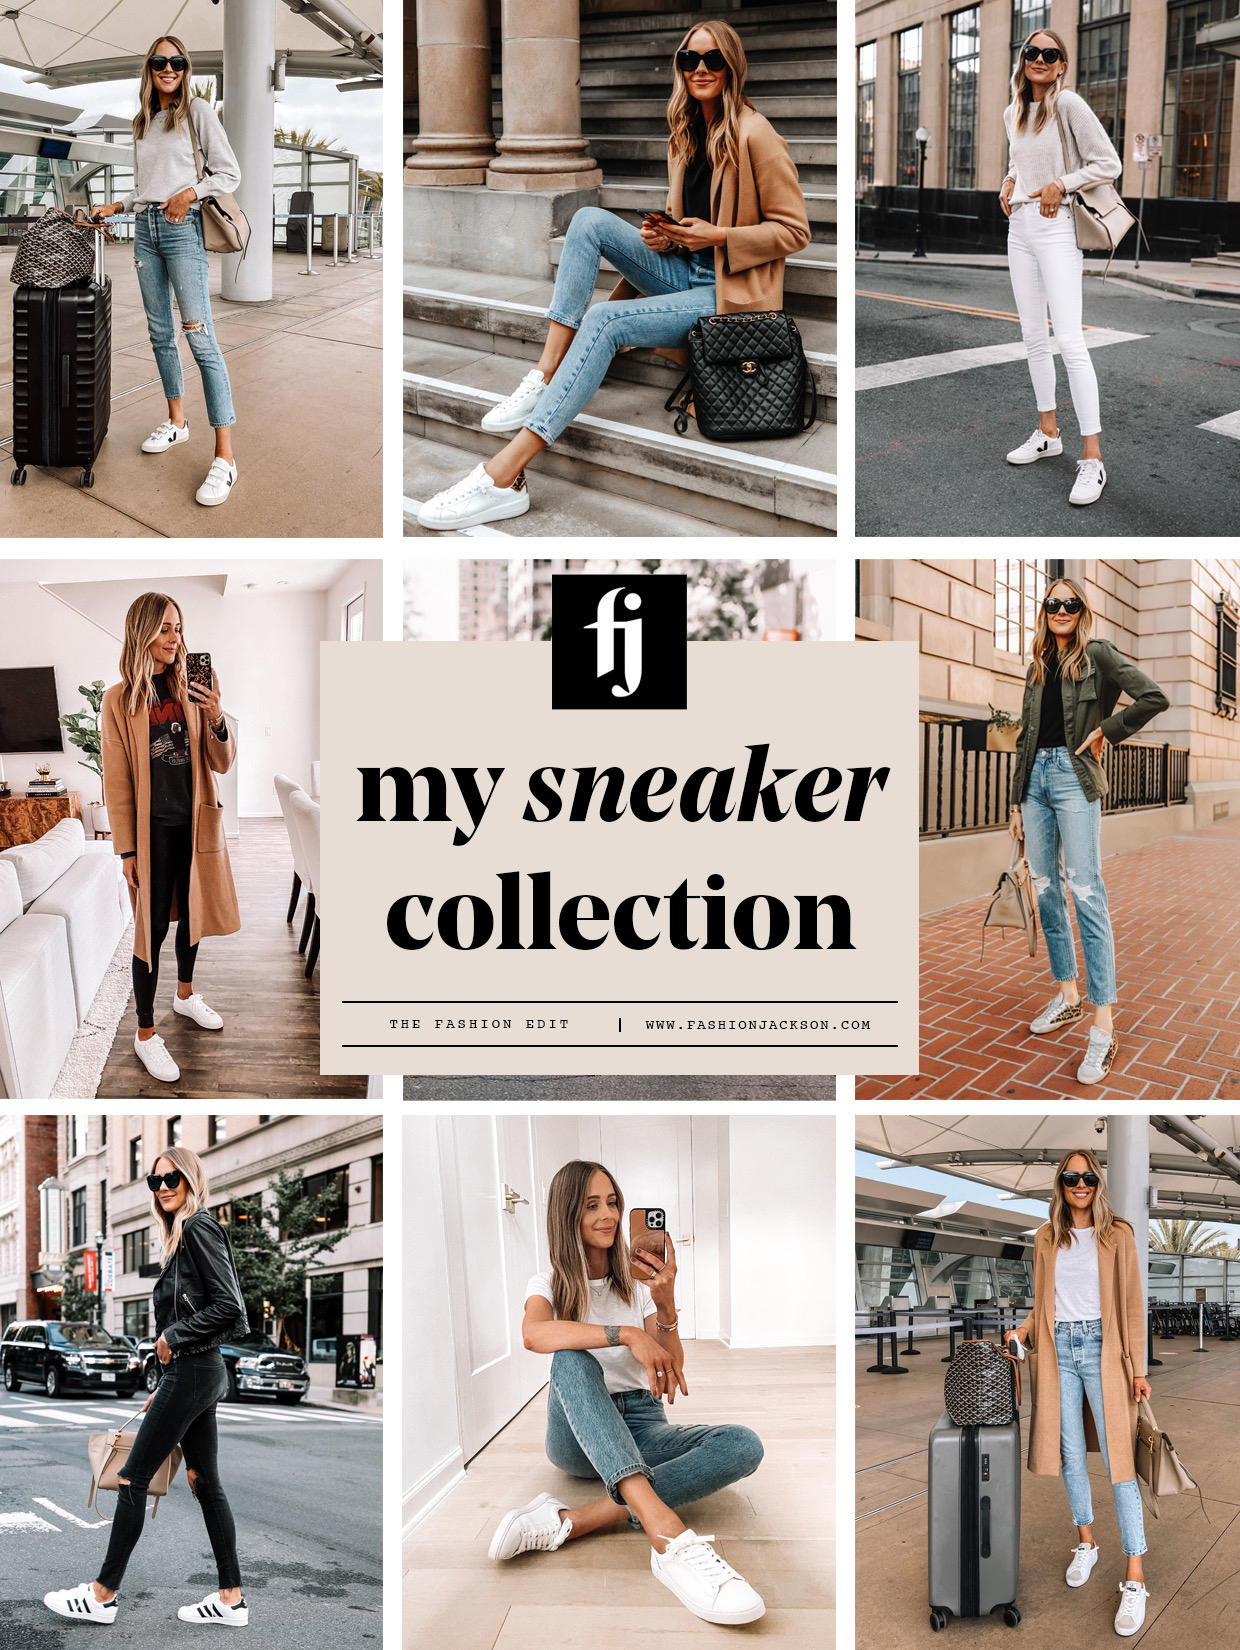 What I Packed & Wore in Dallas: Summer Edition - Fashion Jackson